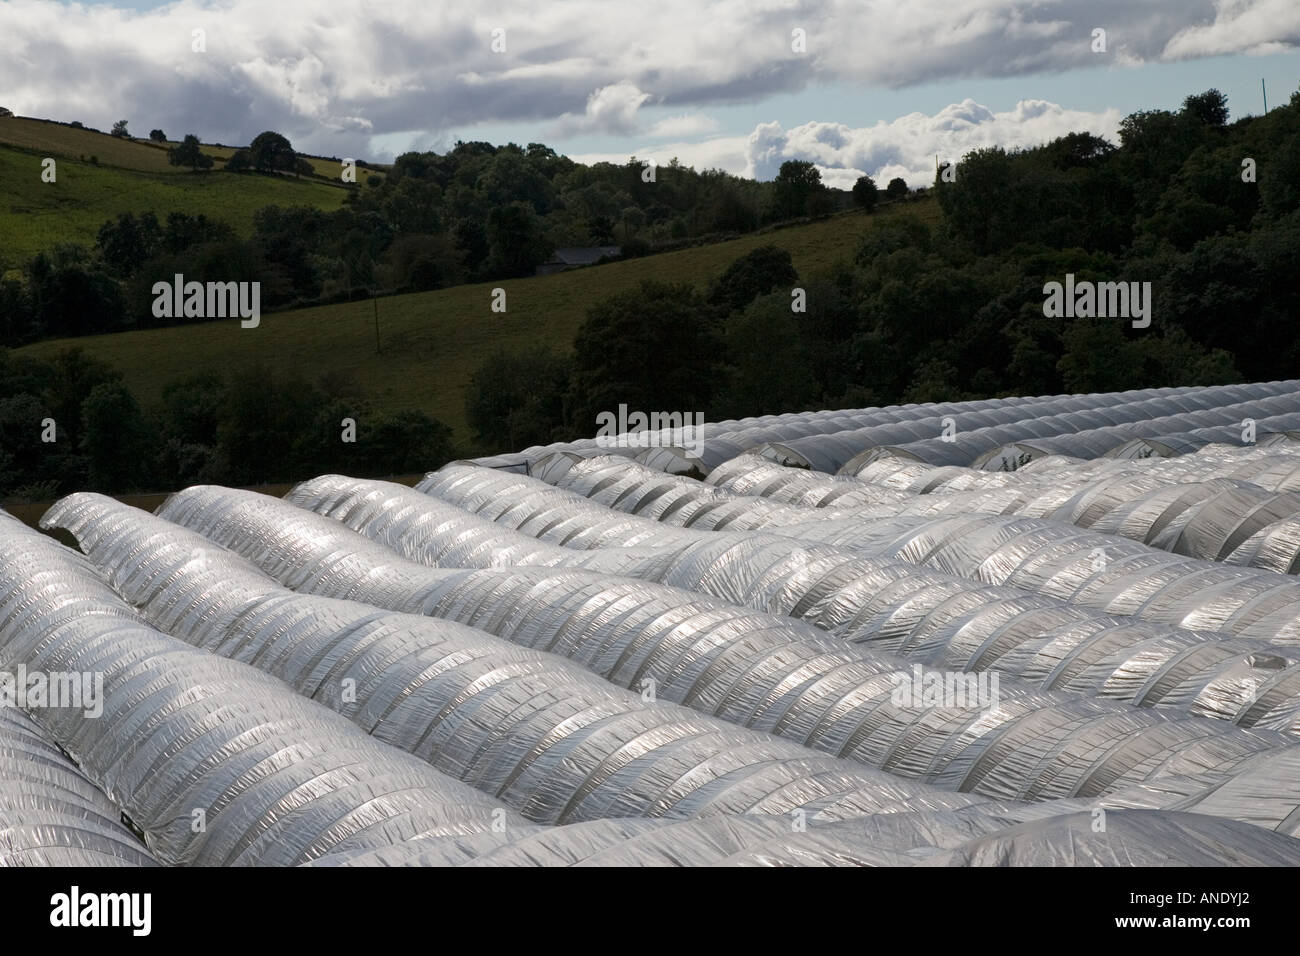 Polytunnels on a fruit farm in Perthshire Scotland Stock Photo